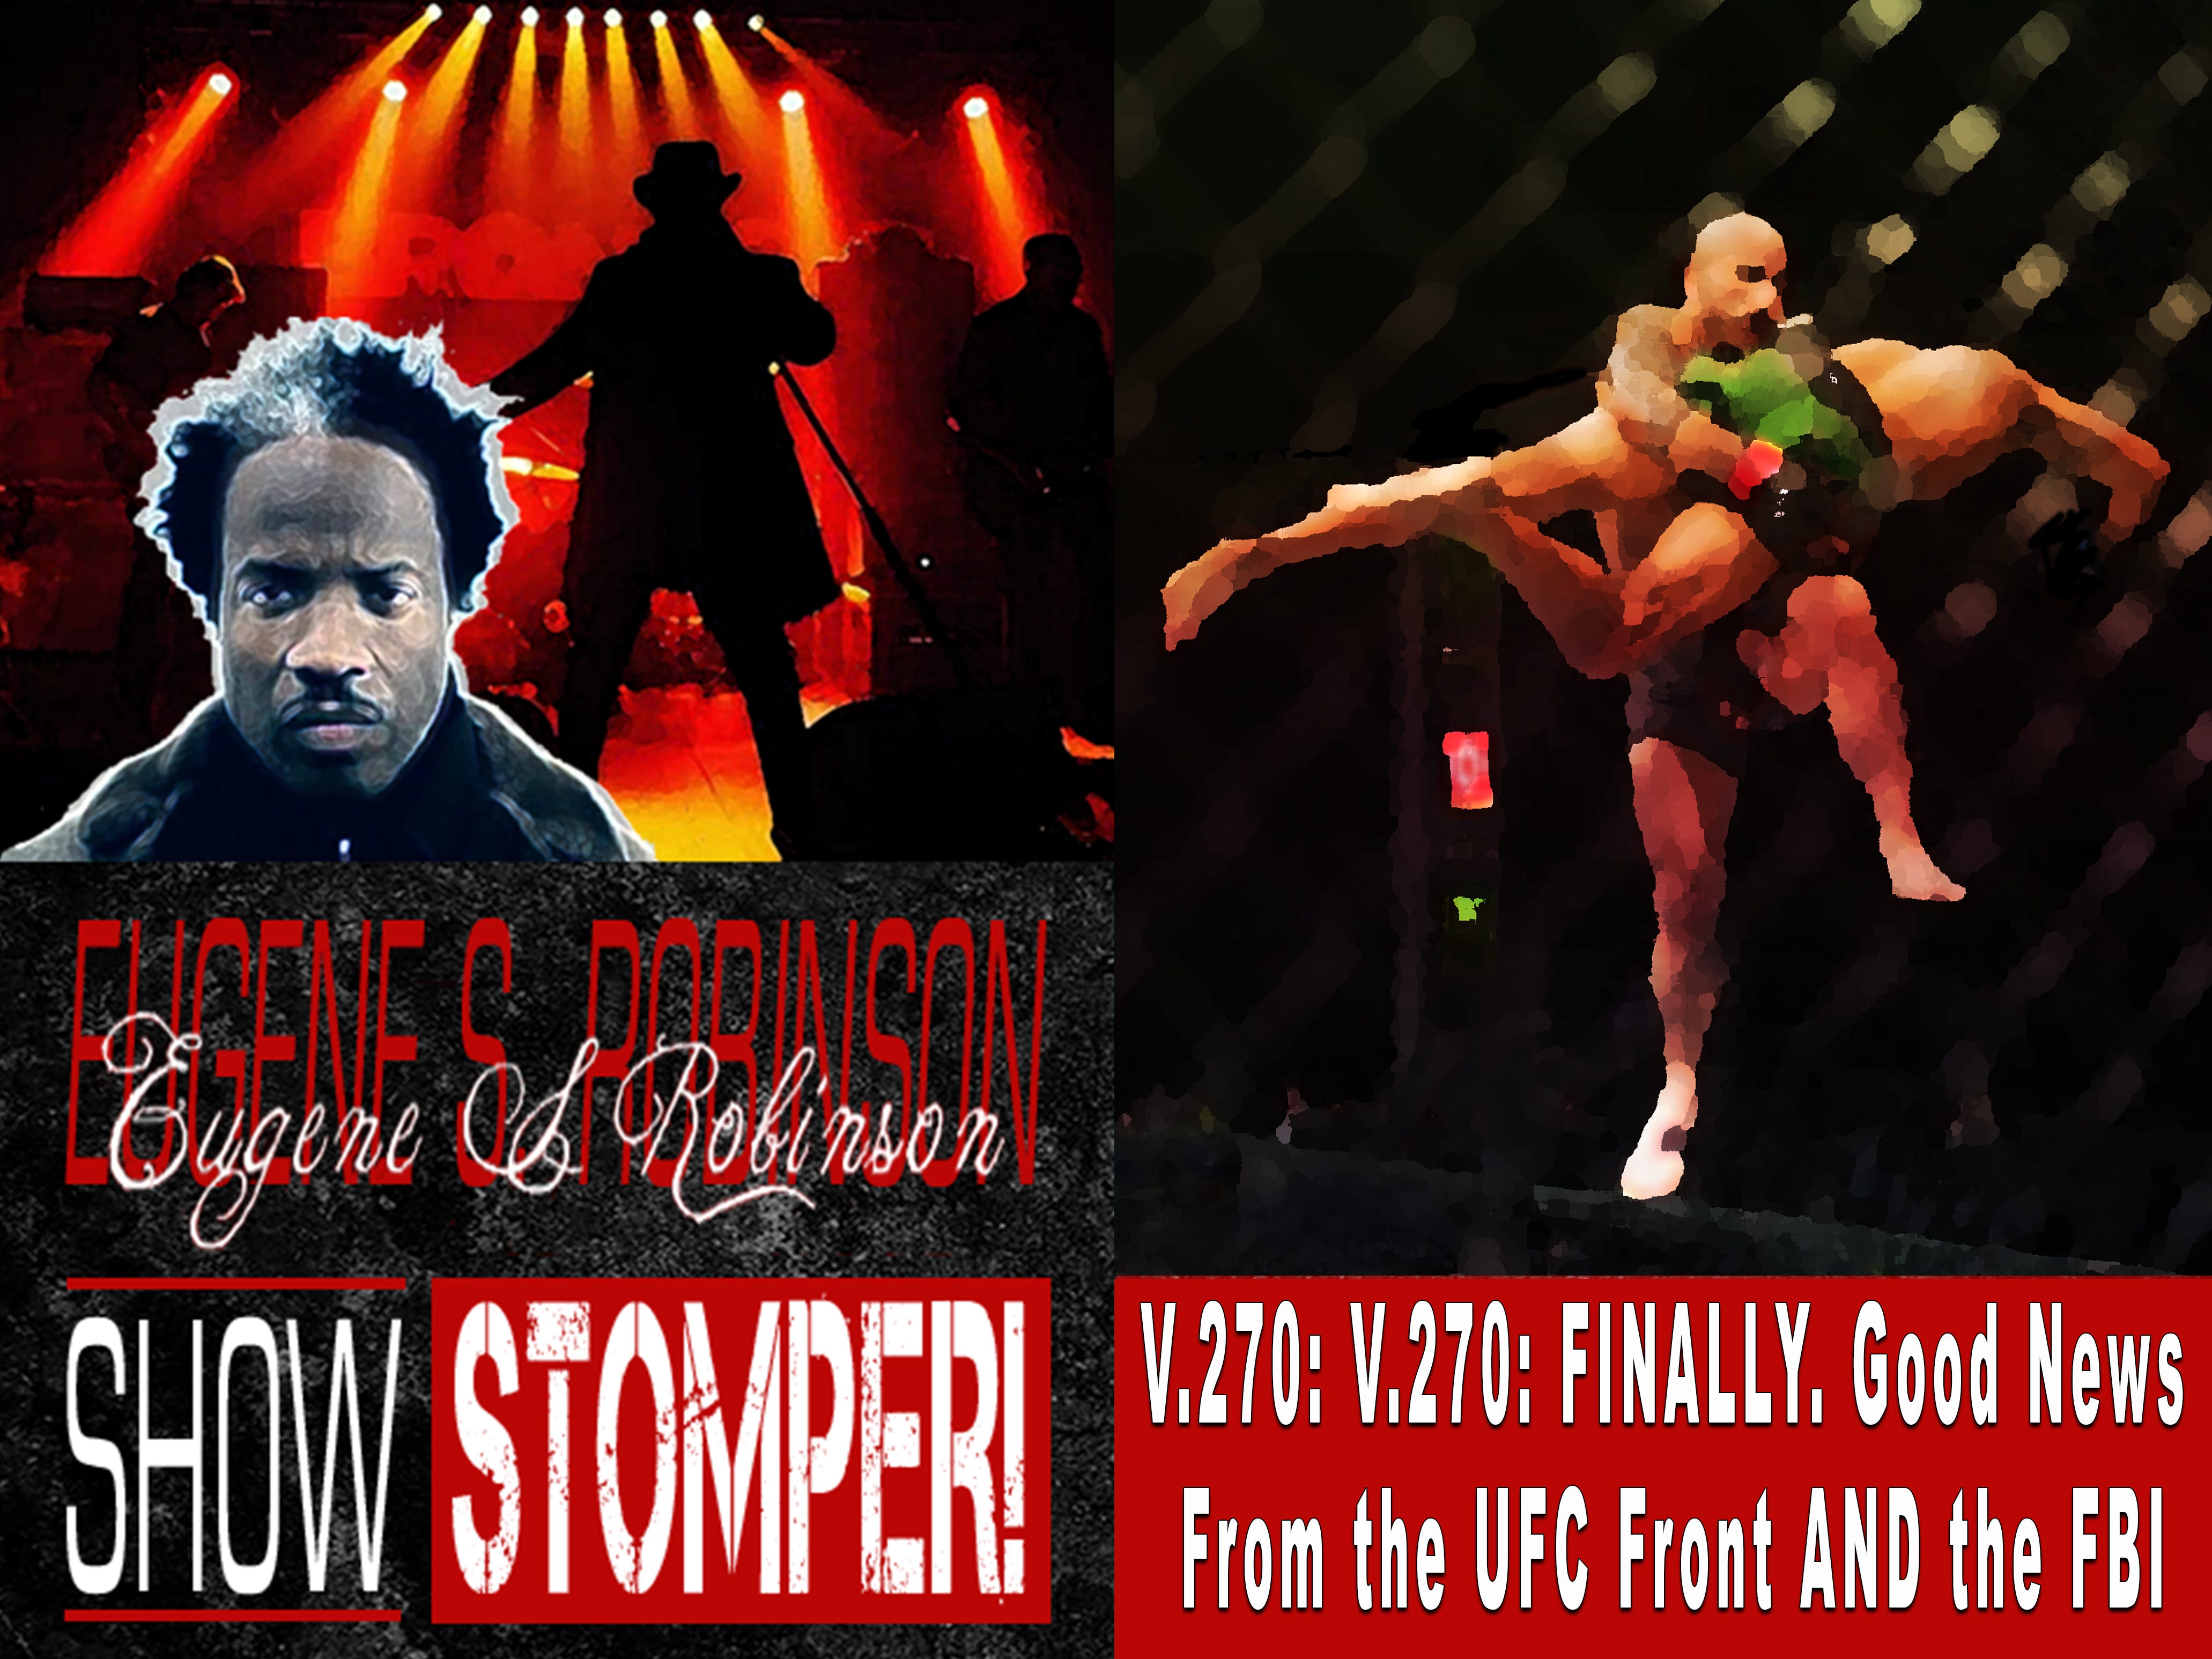 V.270: FINALLY. Good News From the UFC Front AND the FBI On The Eugene S. Robinson Show Stomper!